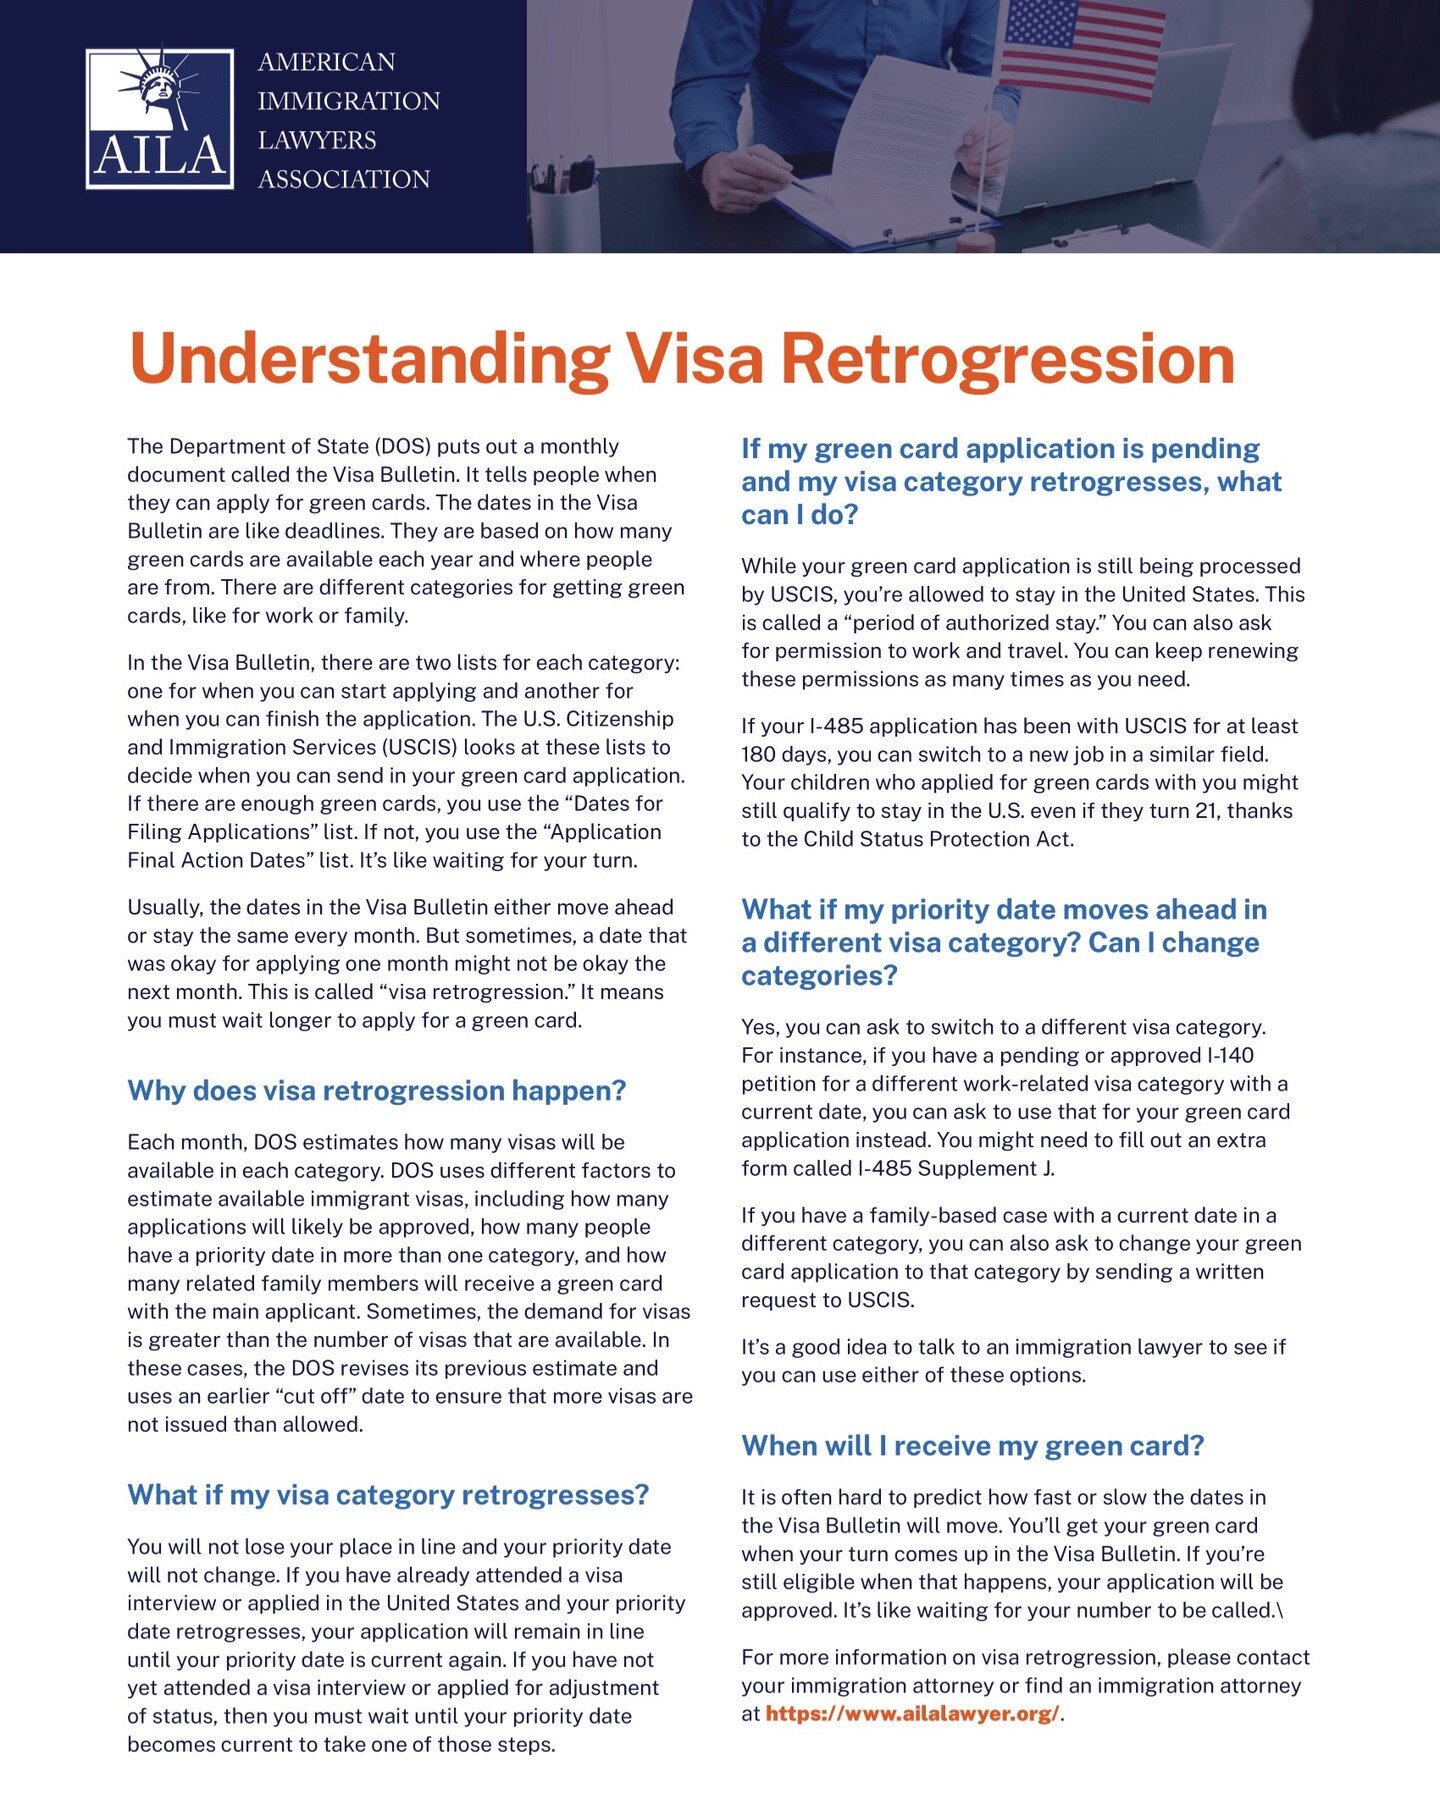 Understanding Visa Retrogression

Have questions? Contact the JCL Immigration Team today for help and answers. ✔️